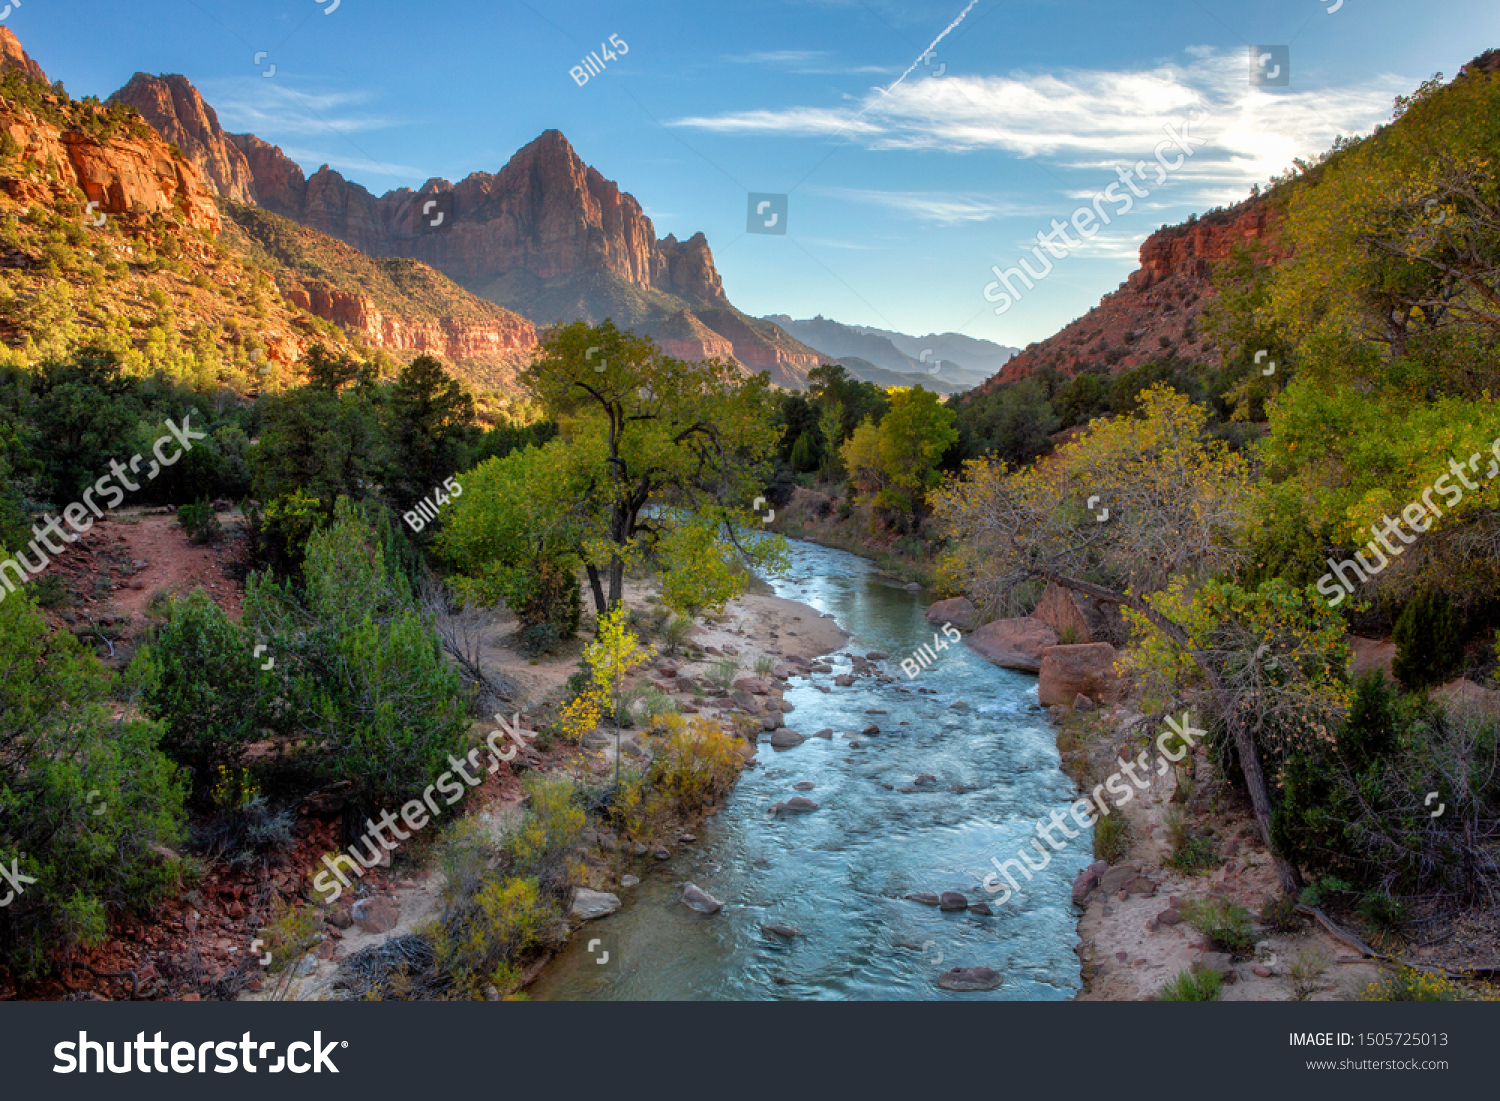 View of the Watchman mountain and the virgin river in Zion National Park located in the Southwestern United States, near Springdale, Utah, Arizona #1505725013